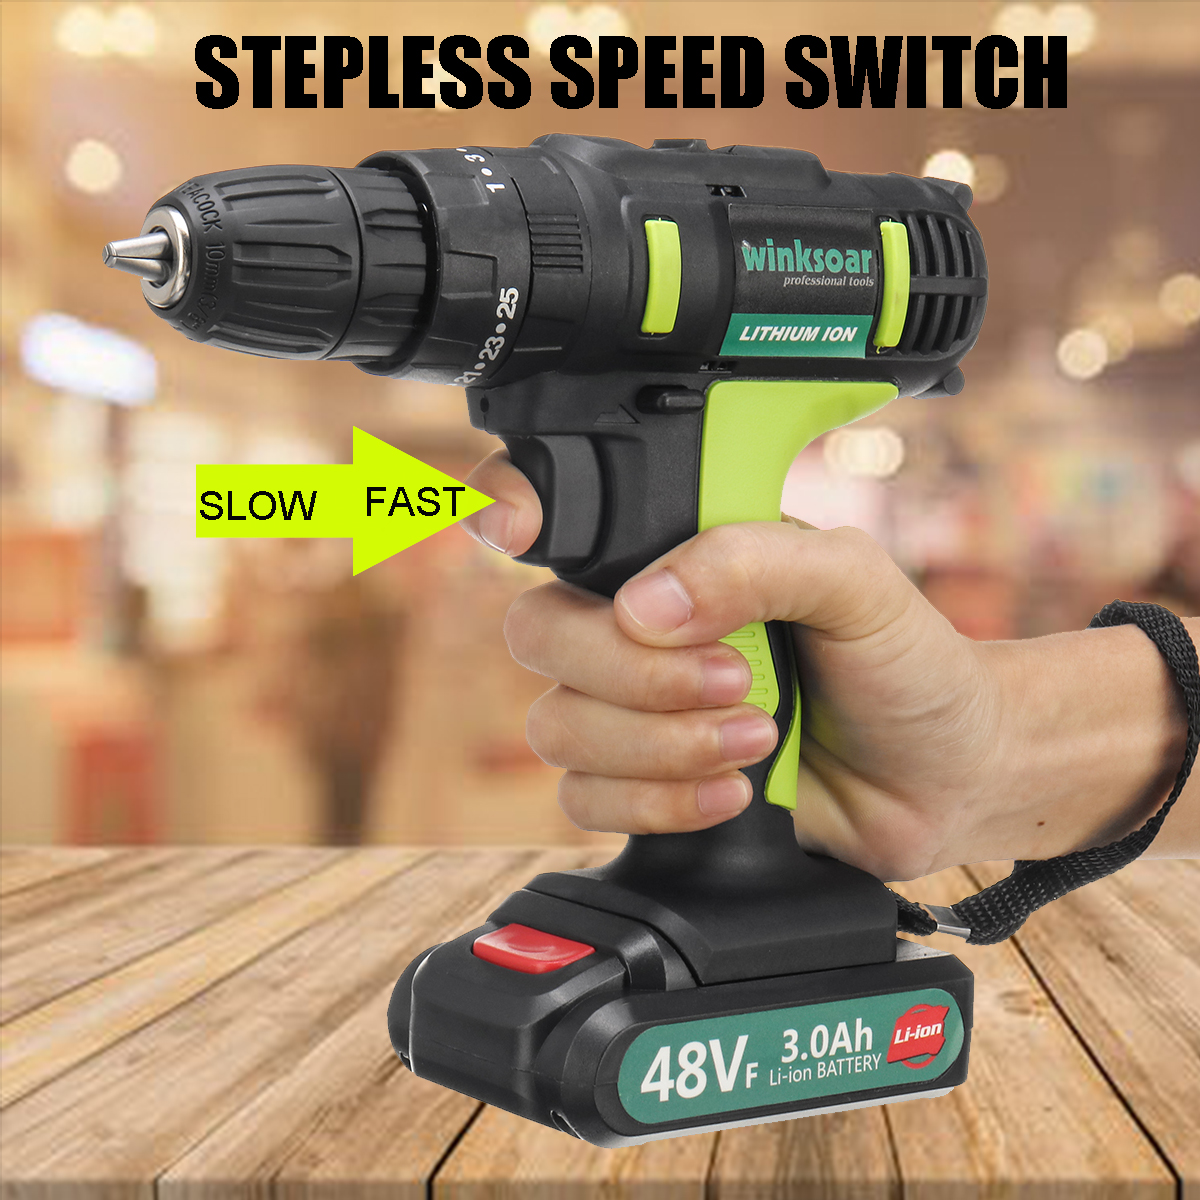 48VF-3-in-1-251-Gears-Electric-Impact-Drill-2-Speeds-Rechargeable-Screwdriver-W-LED-Light-1733392-3